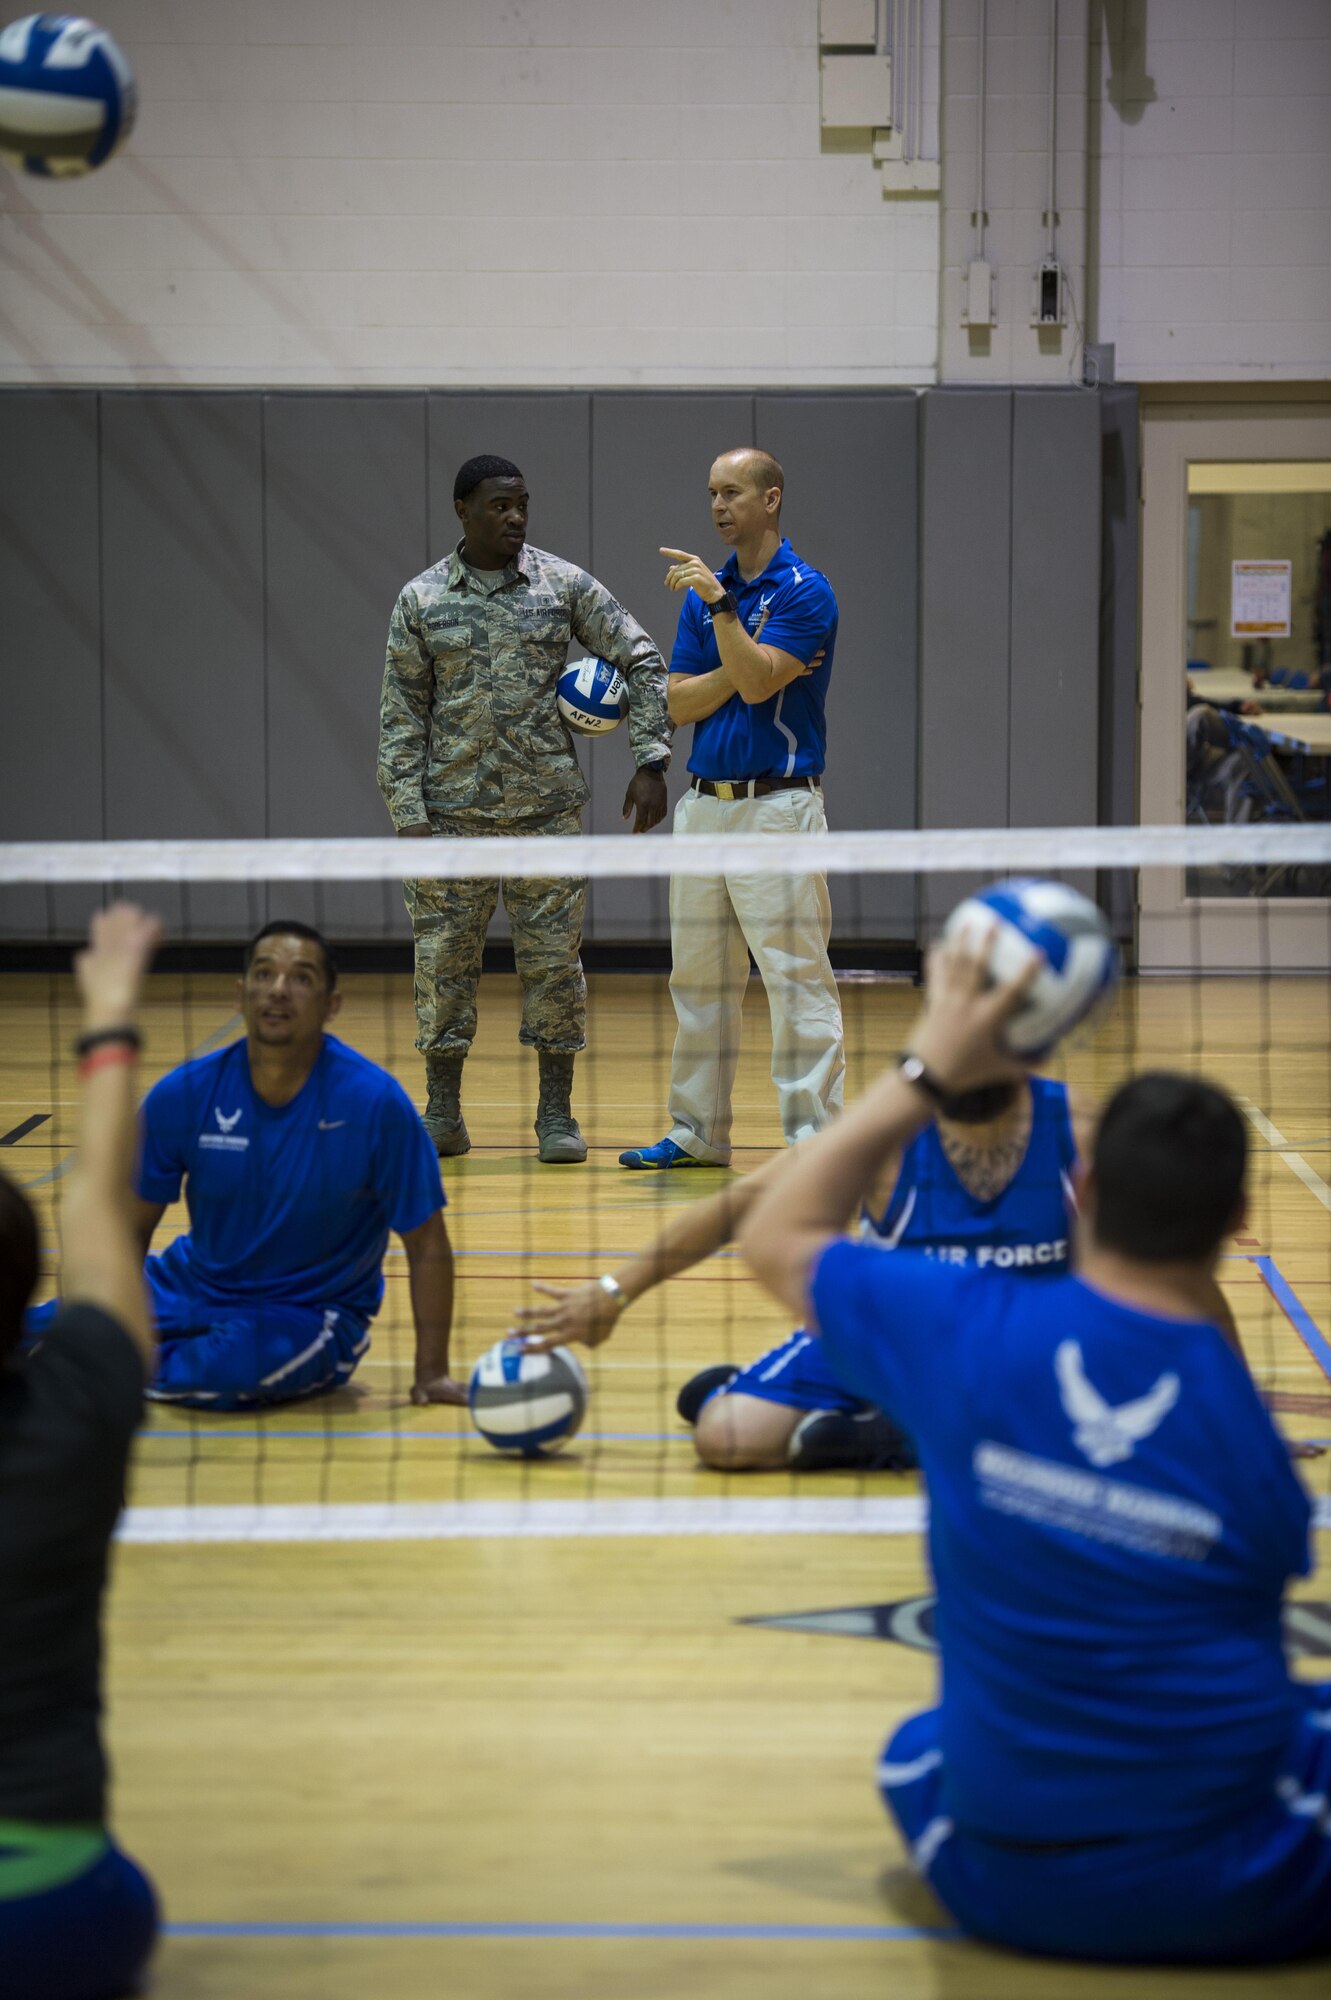 Maj. (Dr.) Sean Martin, right, the chief of sports medicine with Air Force Special Operations Command Office of the Surgeon General, talks to Airman 1st Class Astin Roberson, left, a physical therapy technician with the 1st Special Operations Medical Operations Squadron, at sitting volleyball practice during a Warrior Games training camp at Hurlburt Field, Fla., April 4, 2016. Martin and other medical technicians provide extra services to the athletes during the training camp to ensure as much of their time as possible is spent in the competition and not on the sideline. (U.S. Air Force photo by Staff Sgt. Marleah Miller)